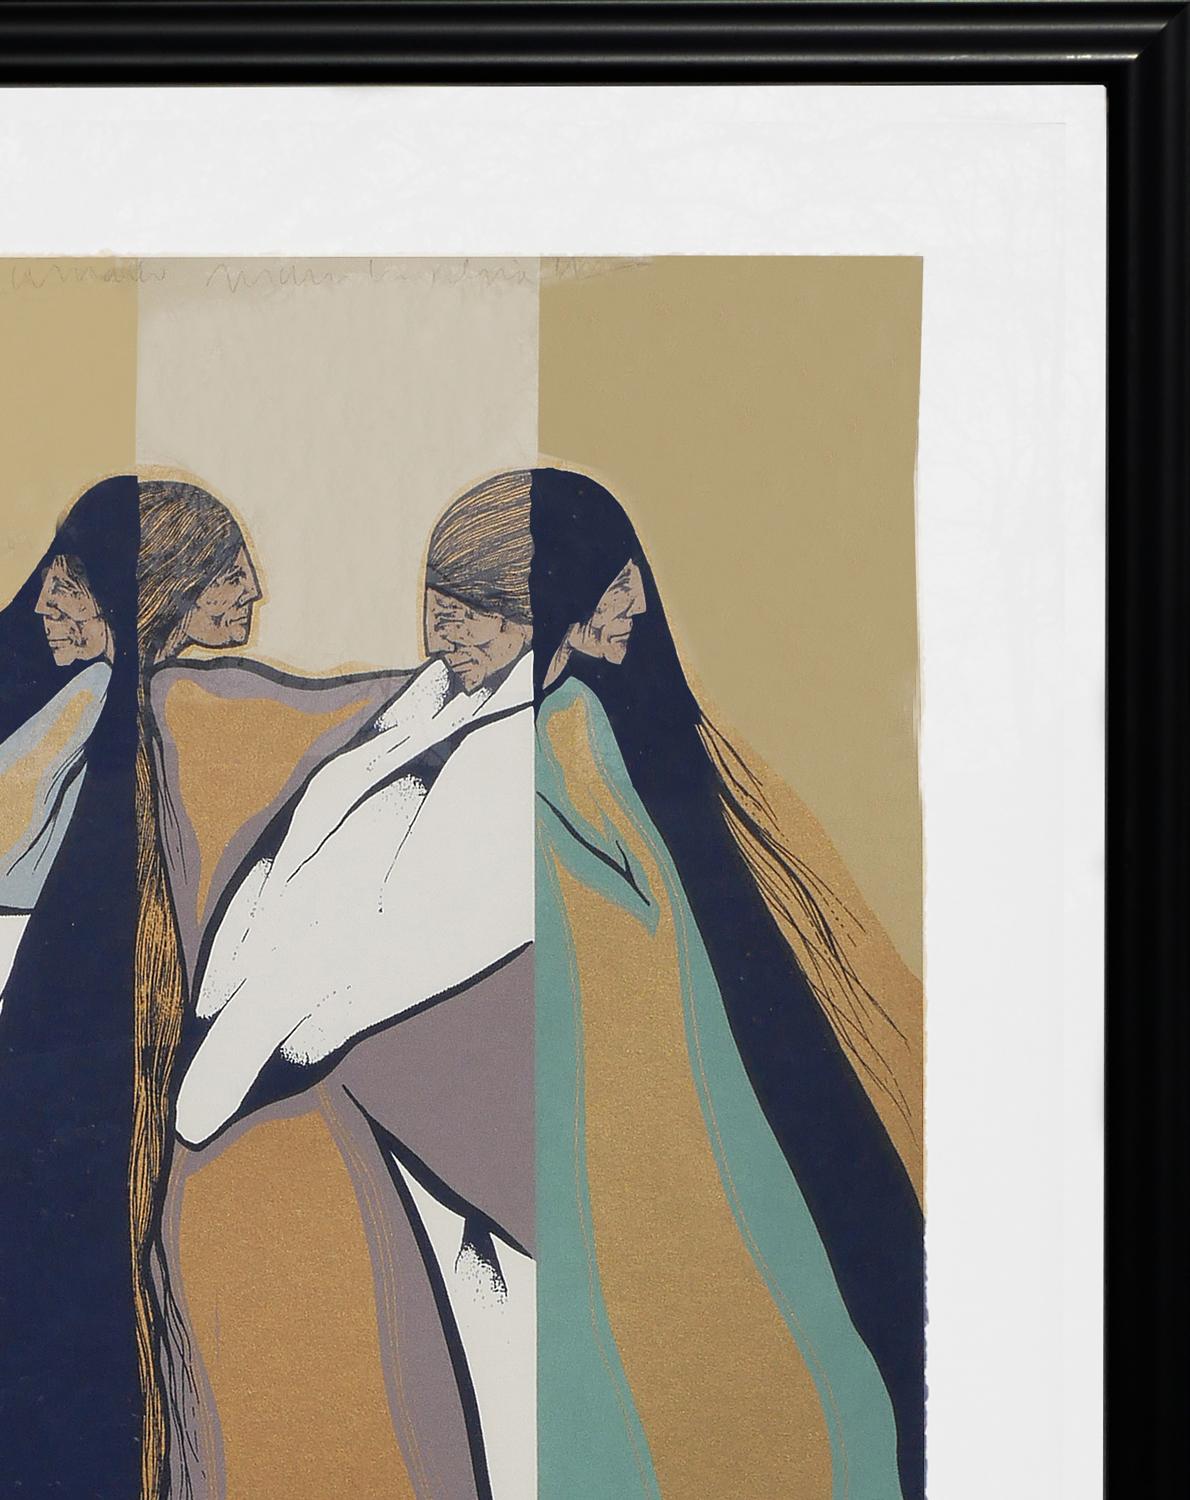 Teal, brown and blue tone abstract figurative original print by Amado Maurilio Pena. The piece depicts five women figures that either appear back-to-back or face-to-face. The women wear long jewel-toned garments with long, black, straight hair